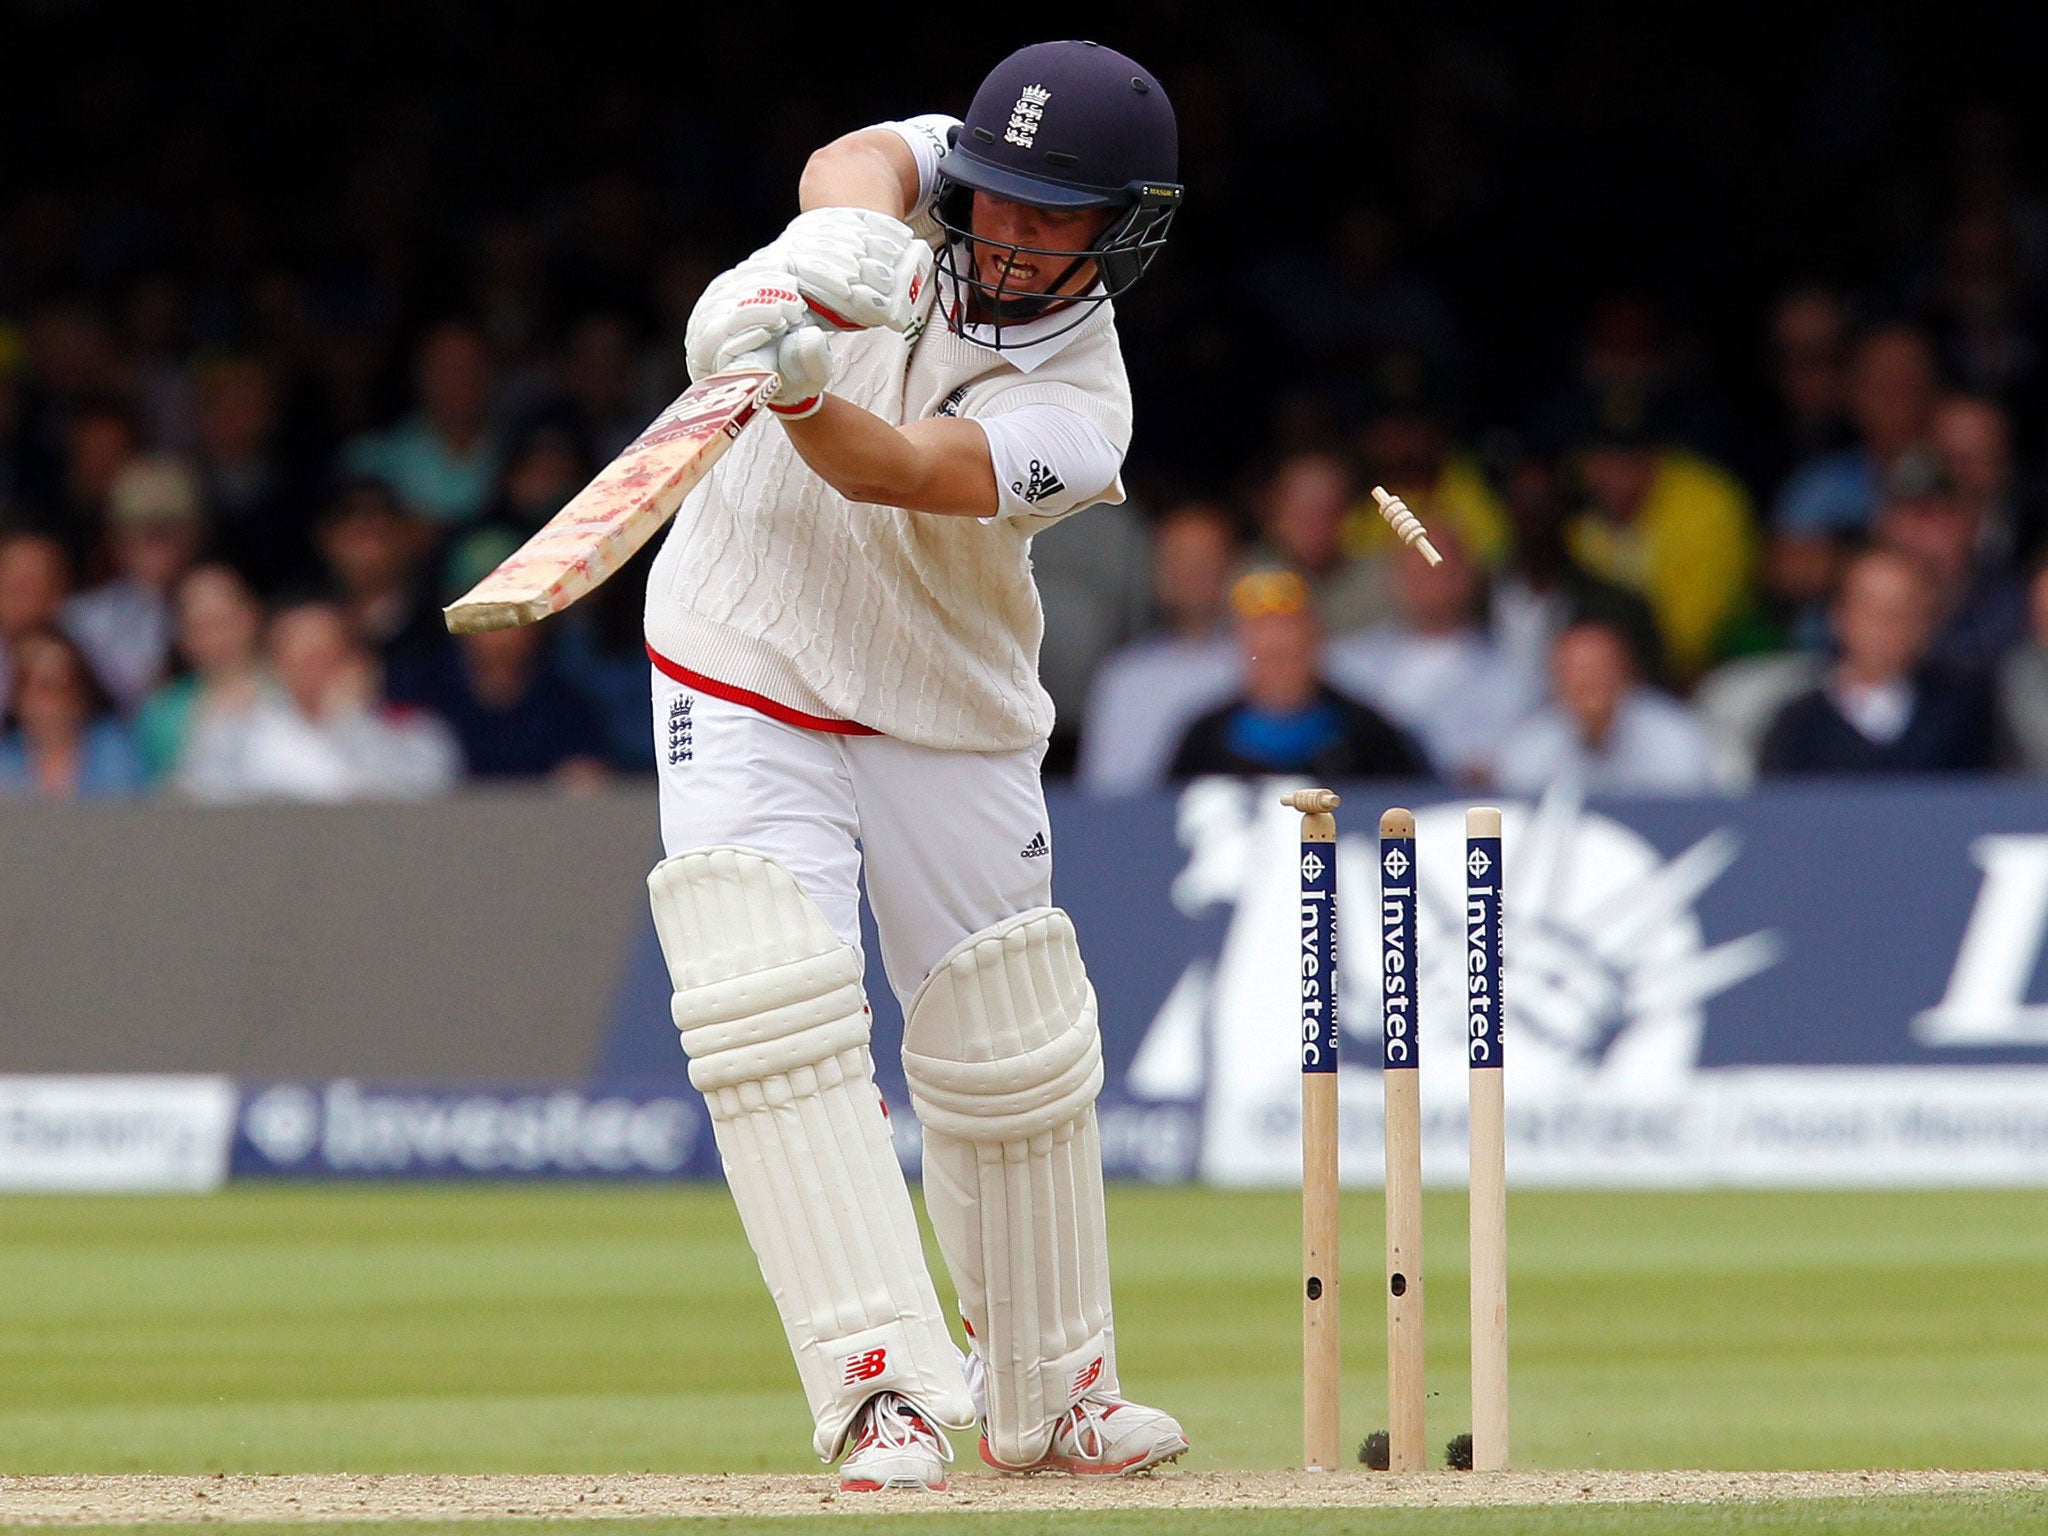 Bails fly as Englands Gary Ballance is bowled out by Australias Mitchell Johnson for 23 runs